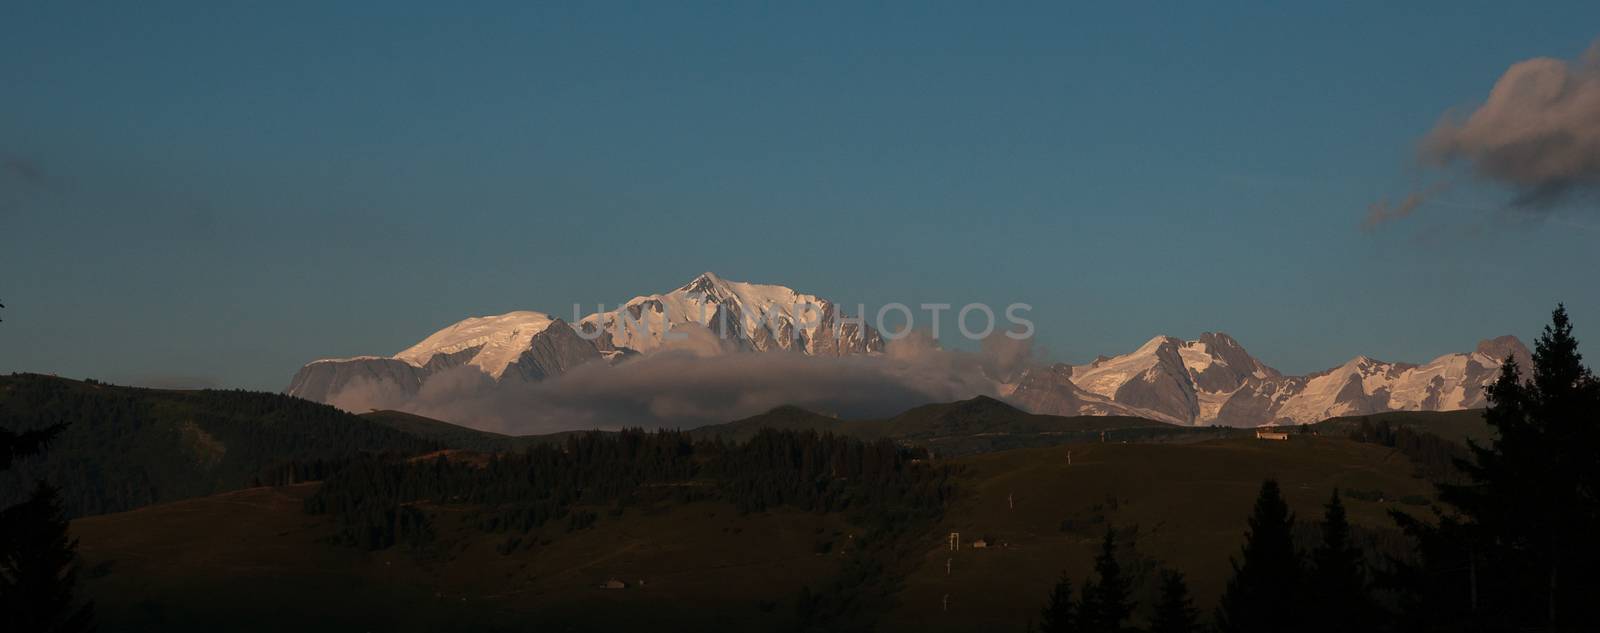 Evening in Alps mountains by javax